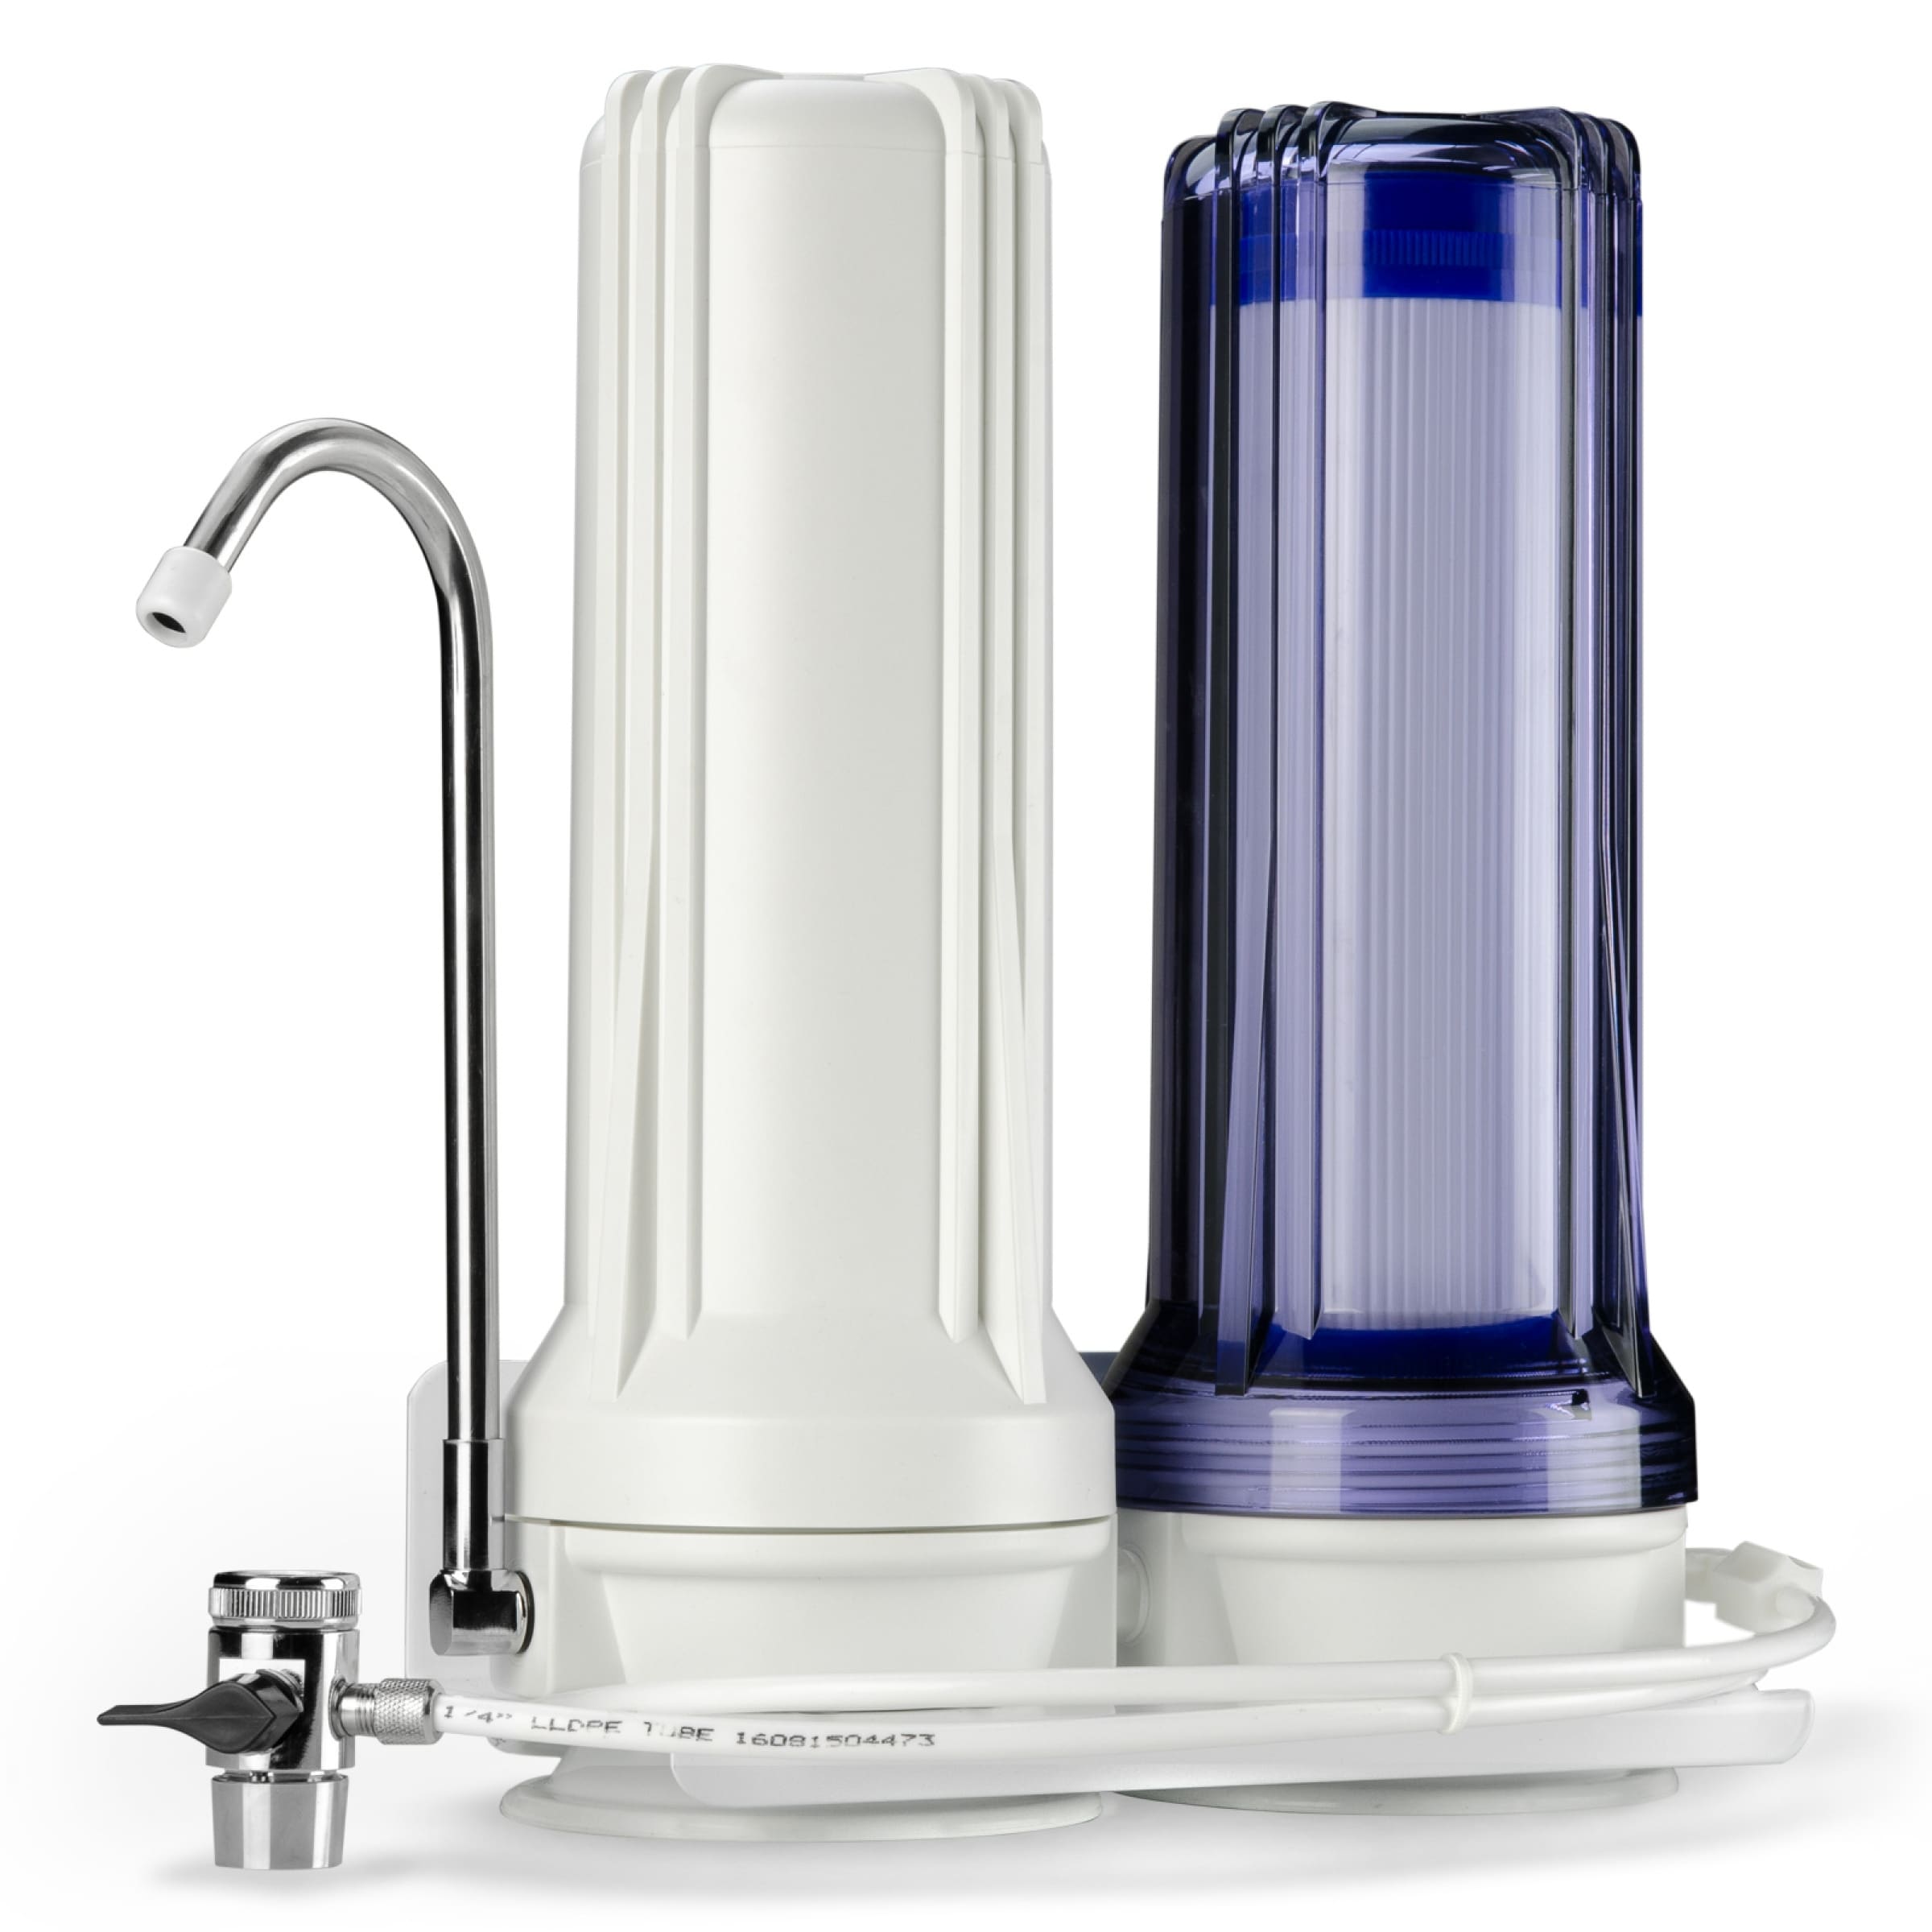 iSpring CKC2 2-Stage Countertop Water Filtration Dispenser System- Includes Activated Carbon and Carbon Block Filters